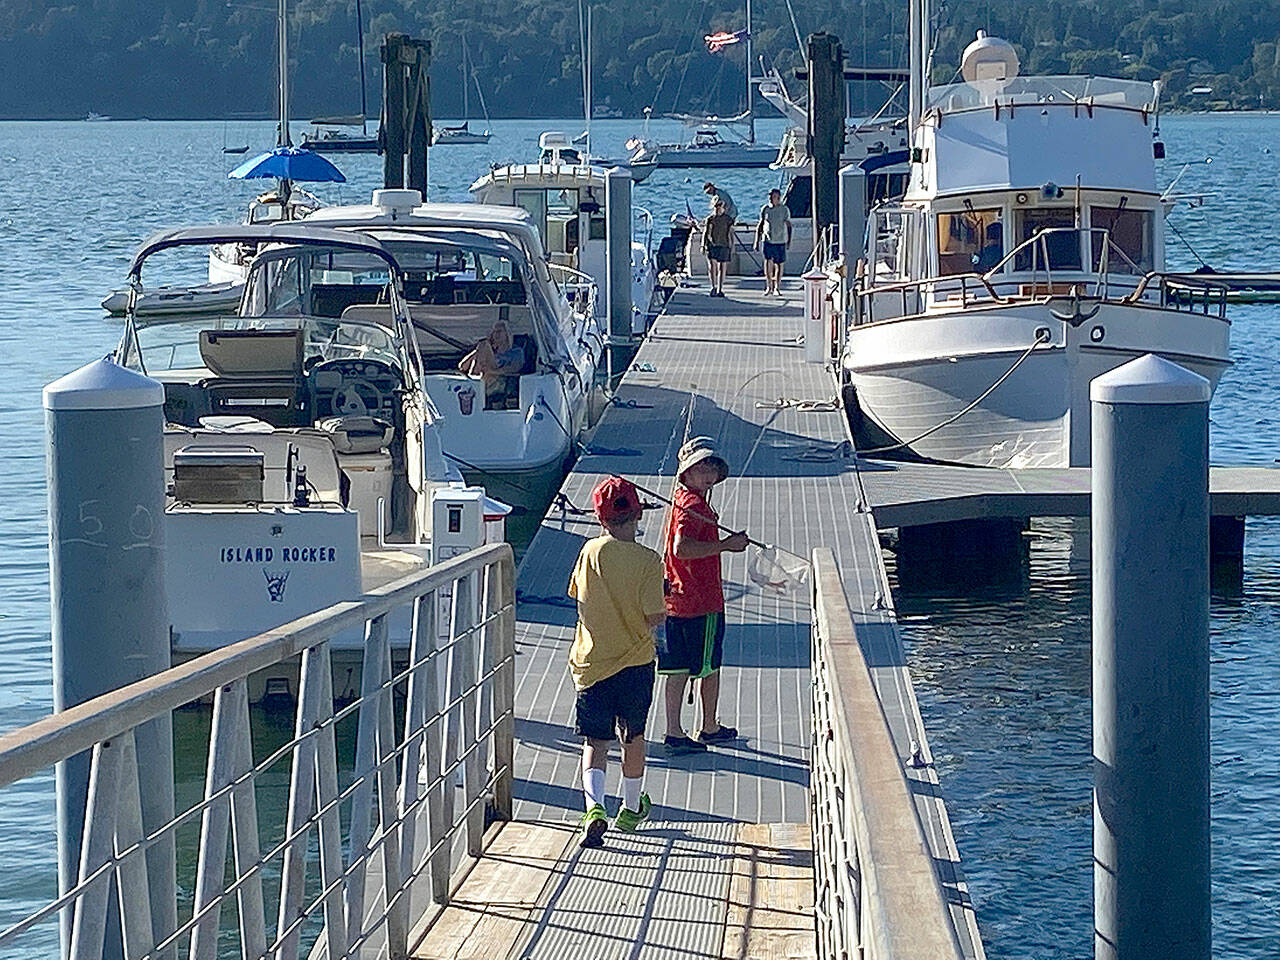 Last Saturday, the re-opened Dockton Marina was lively, with boaters, sunbathers and even a small band of intrepid fisherman on the pier. (Tom Hughes Photo)